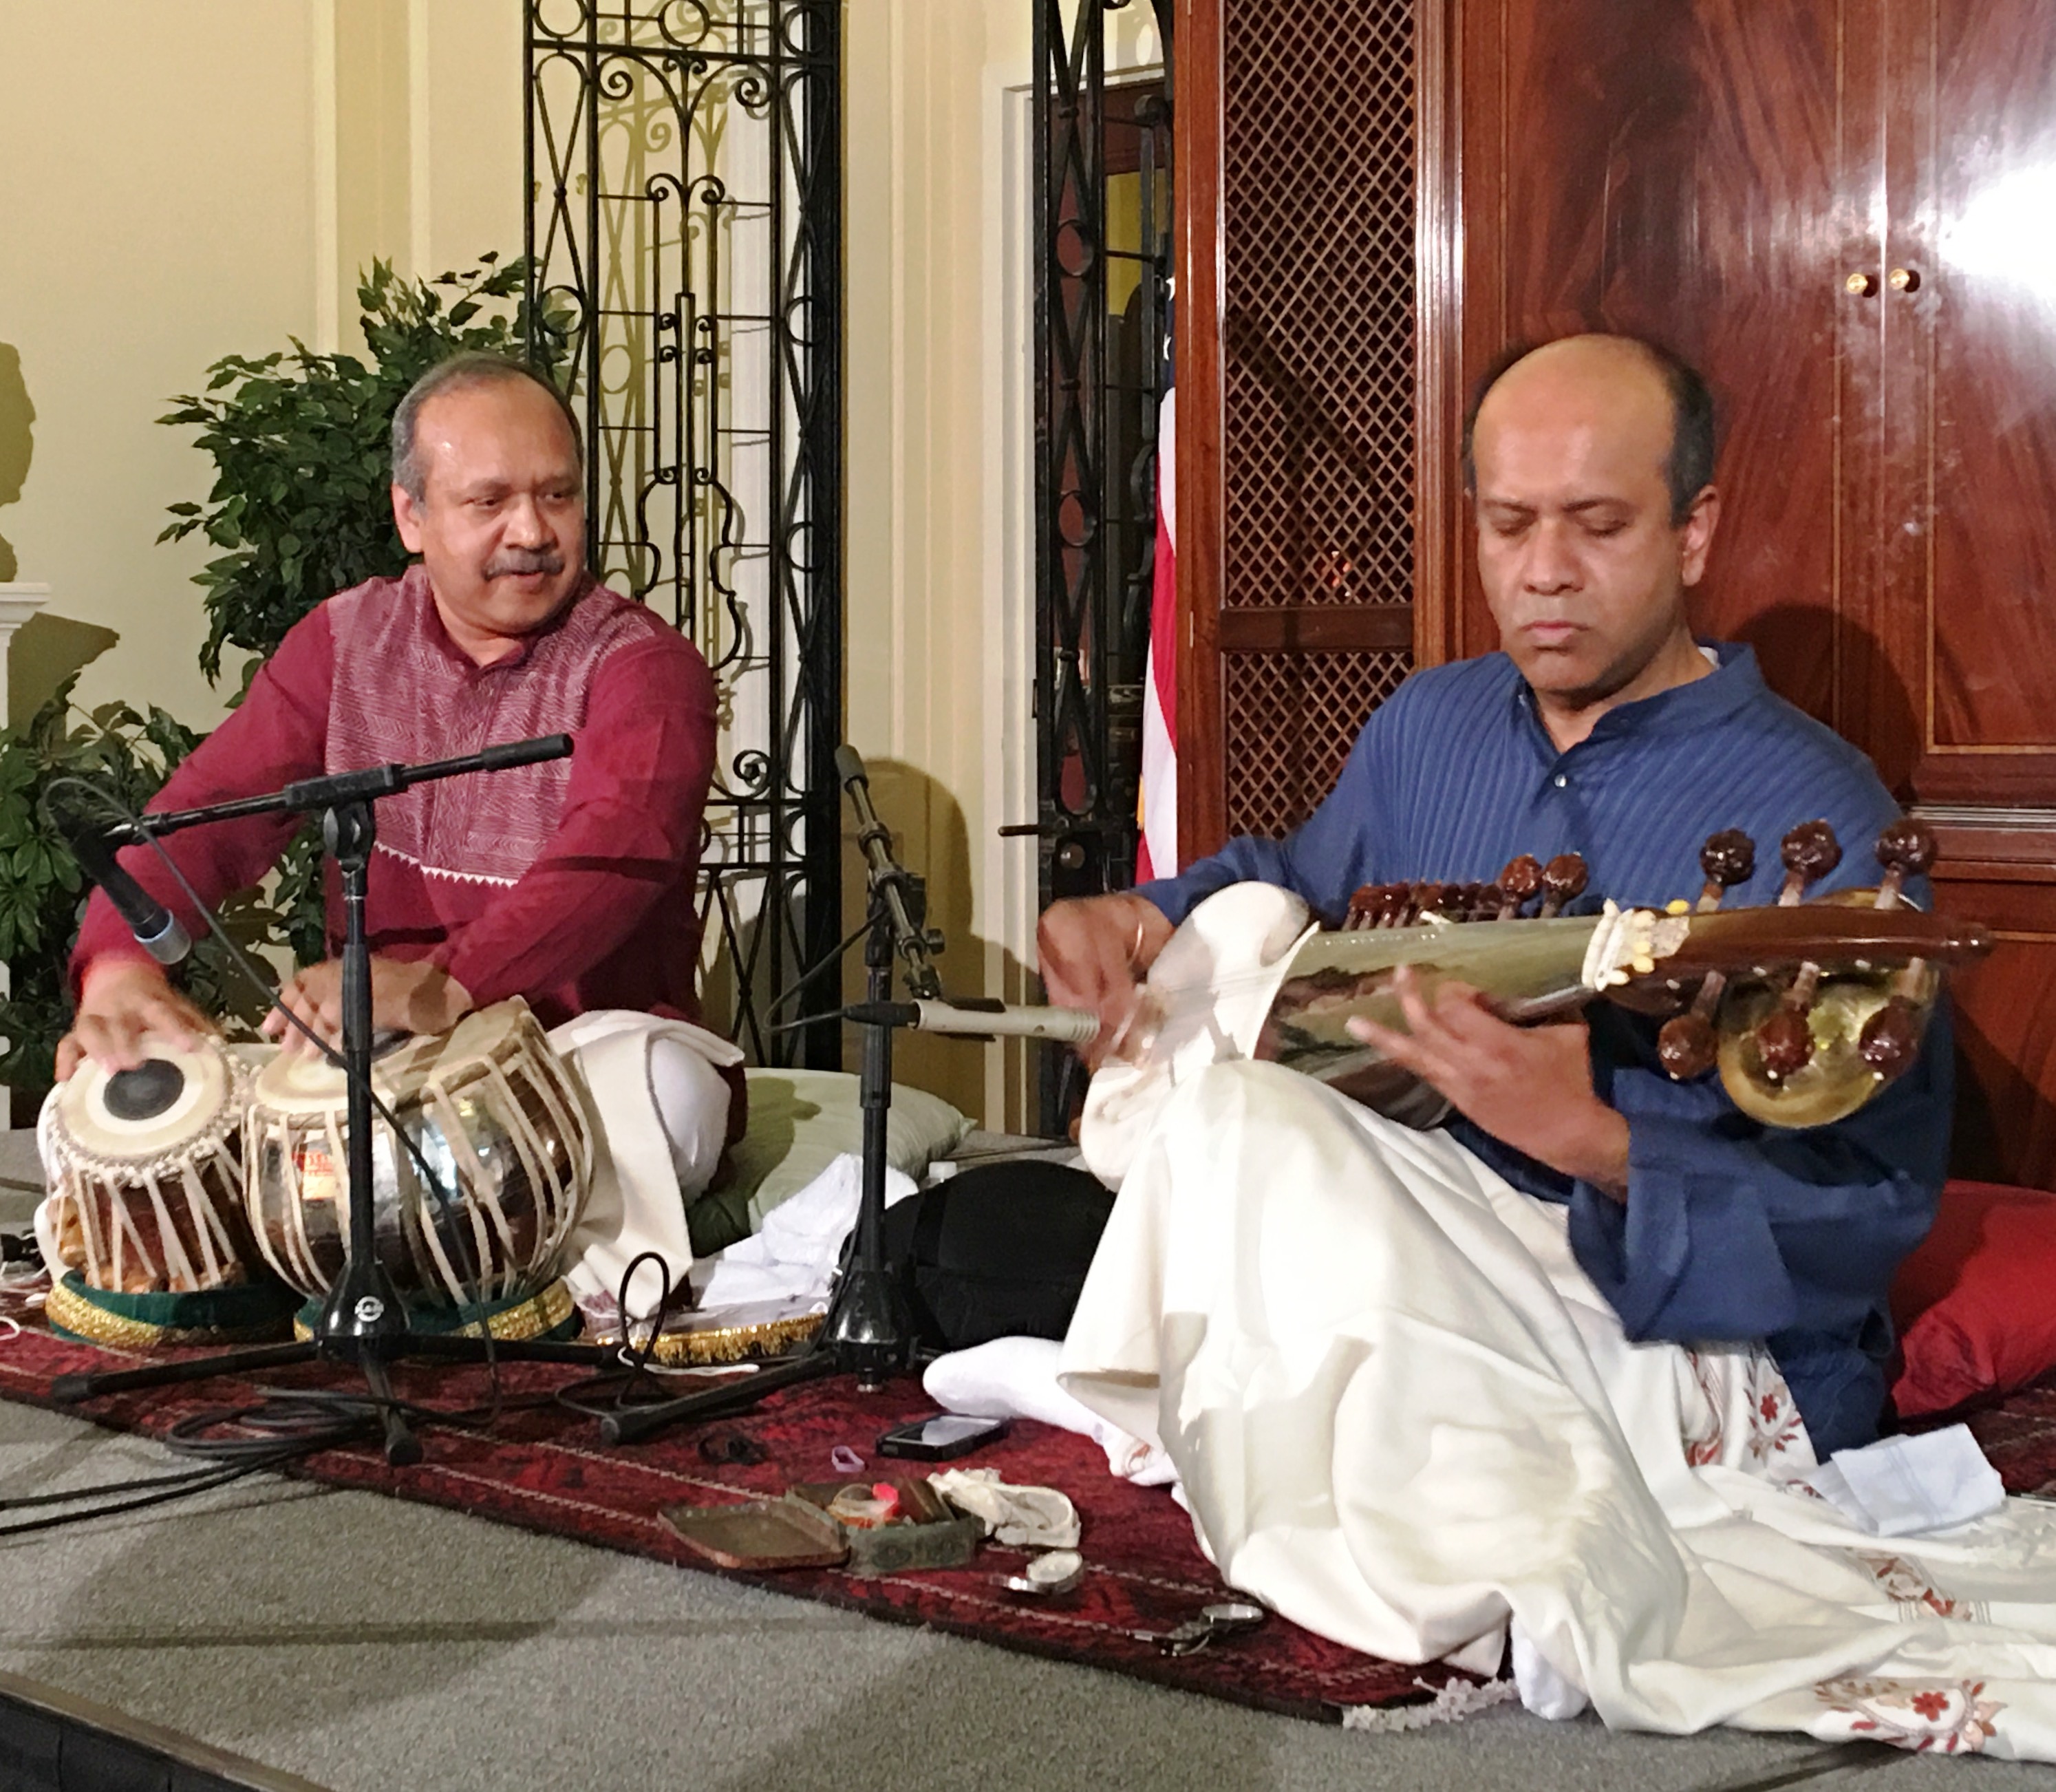 Two men sitting on a floor playing musical instruments.